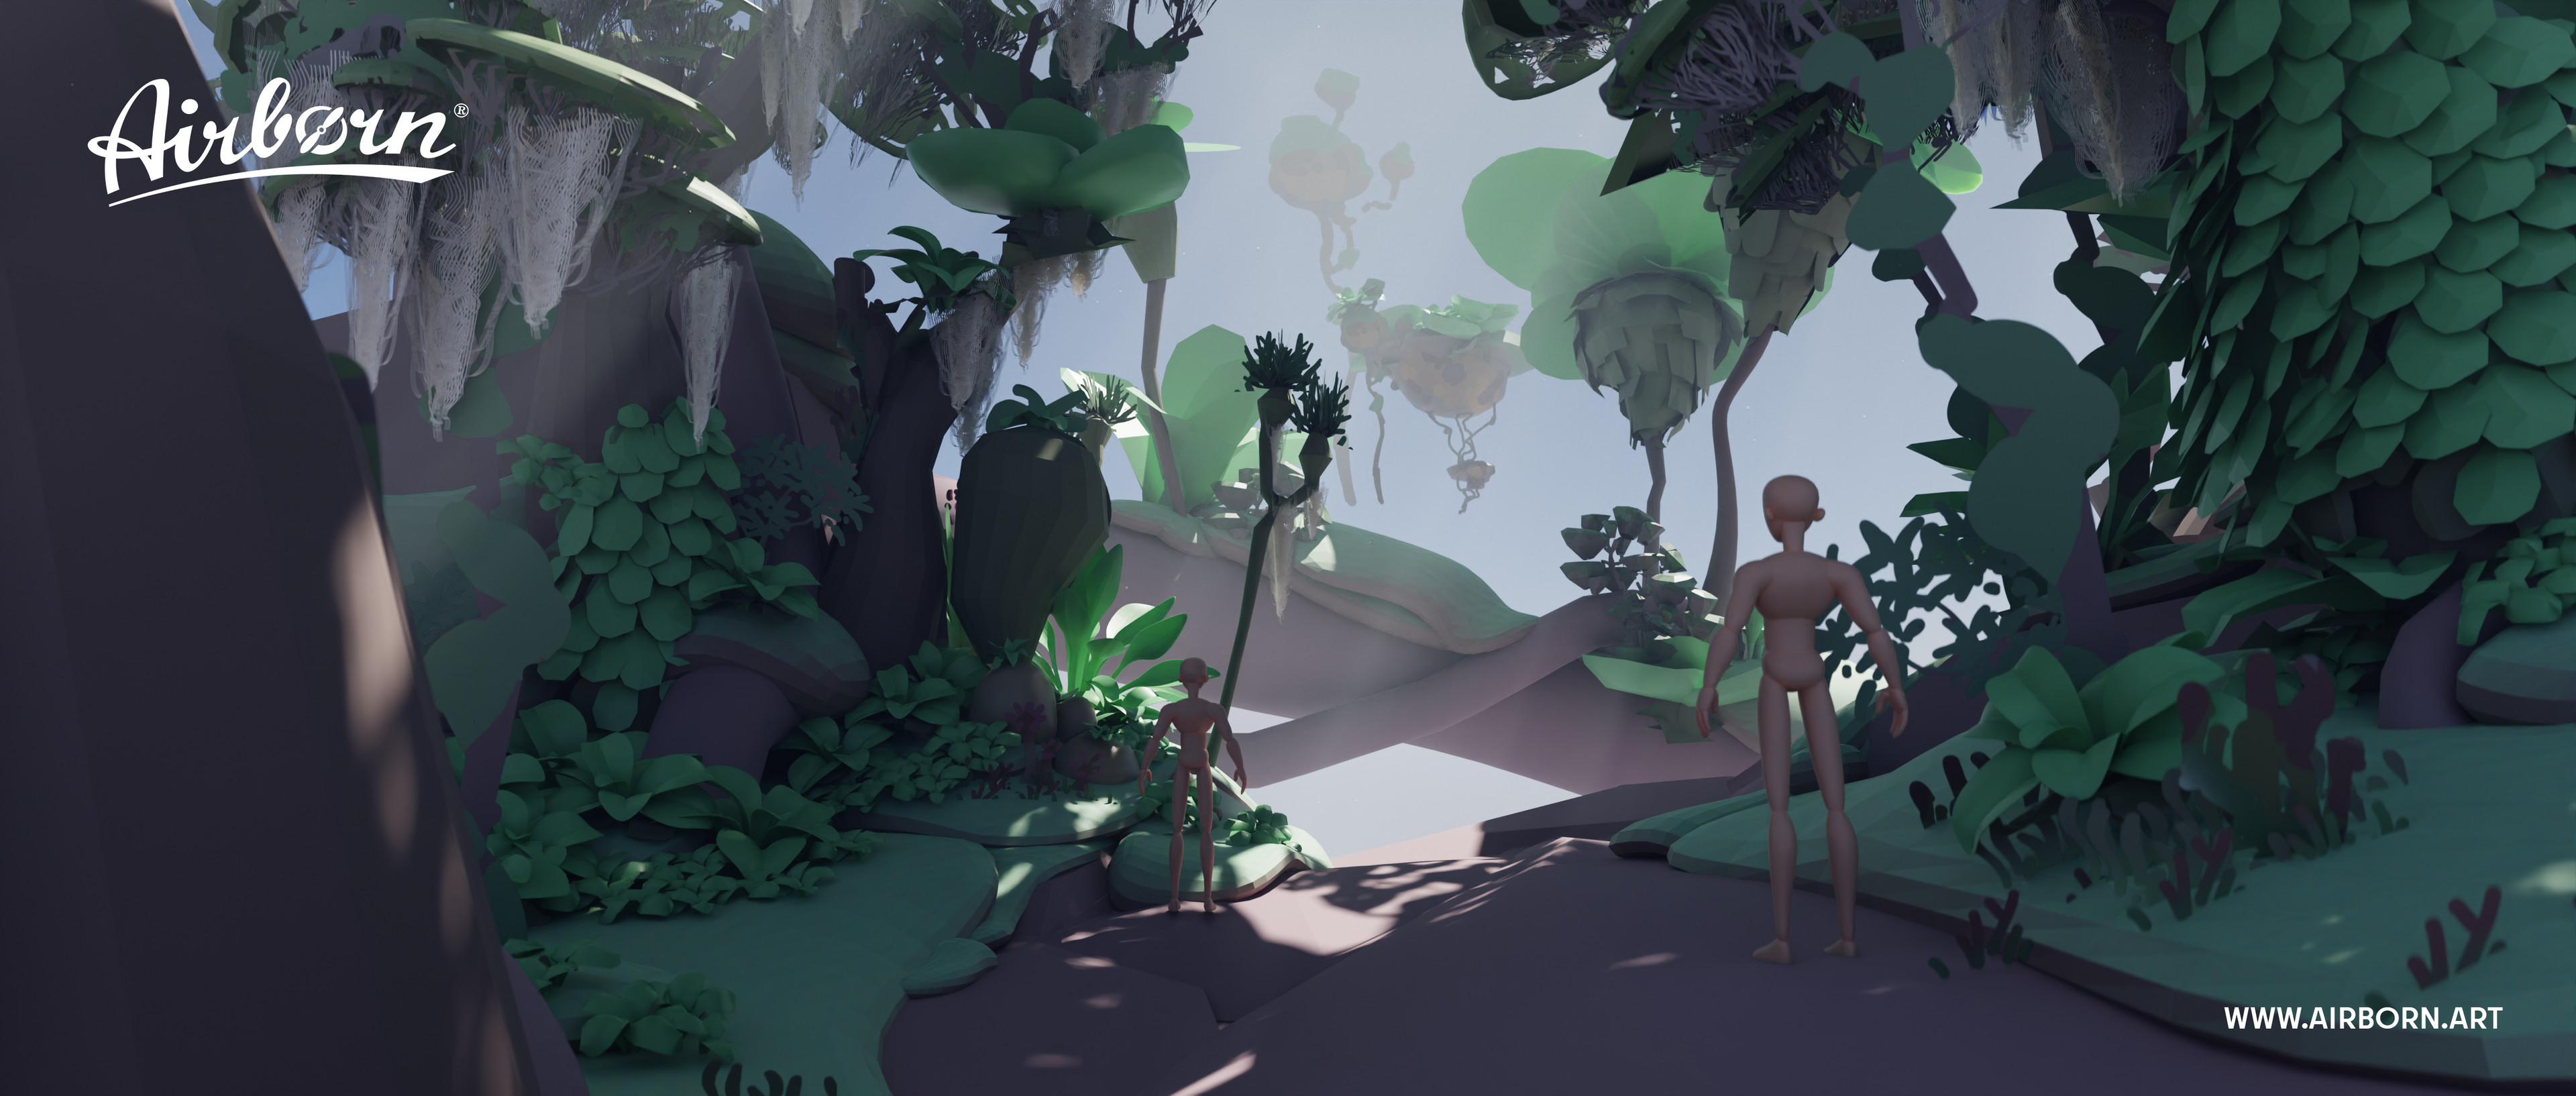 Early 3d adaptation of plants for the jungle setting by myself